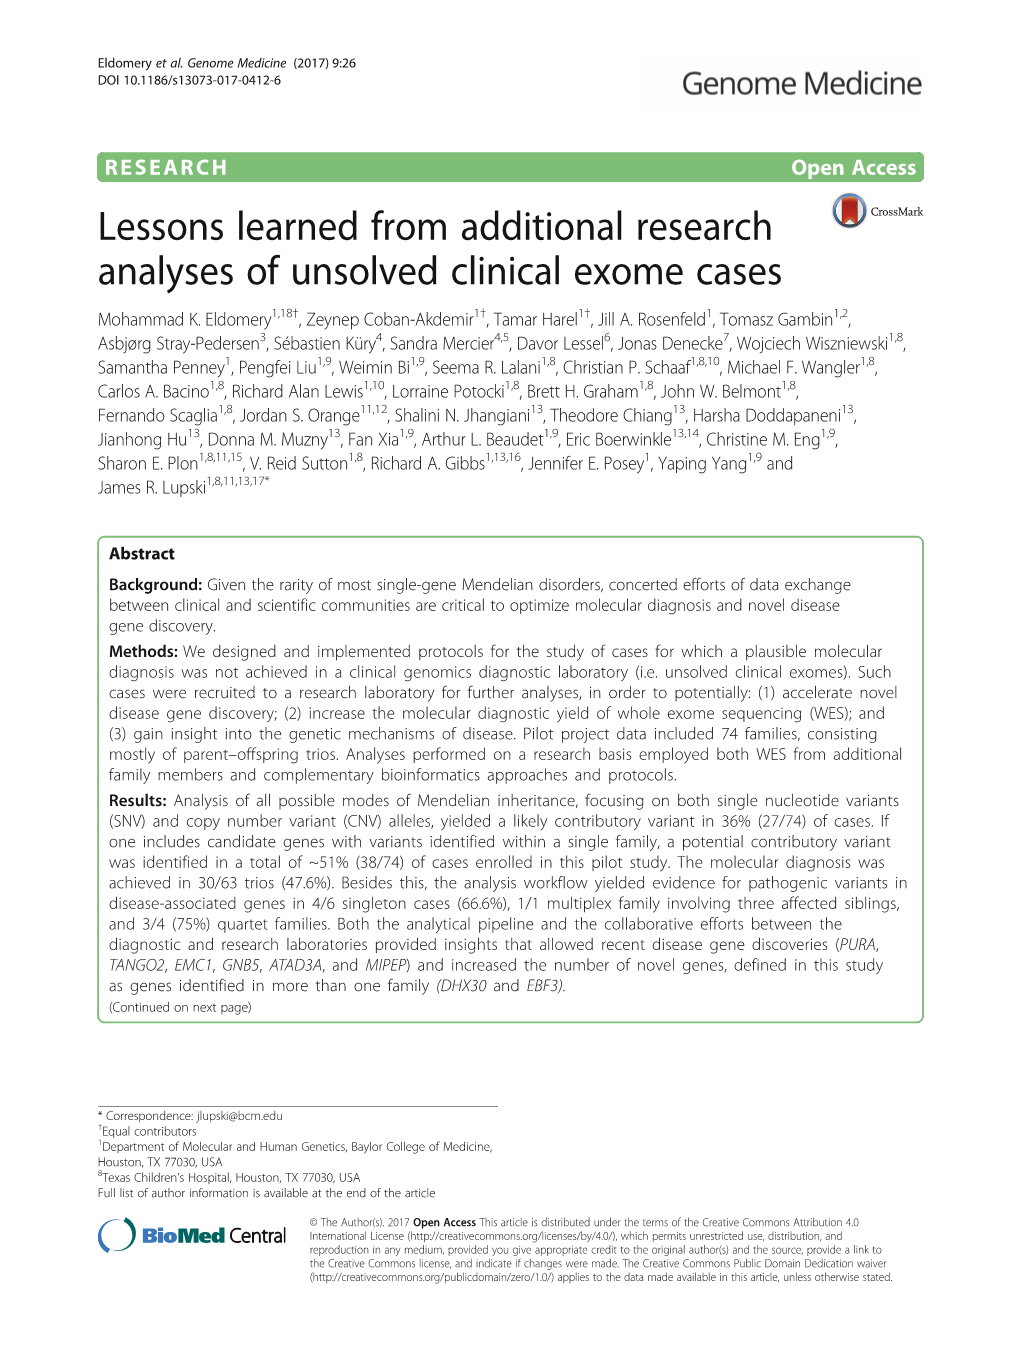 Lessons Learned from Additional Research Analyses of Unsolved Clinical Exome Cases Mohammad K